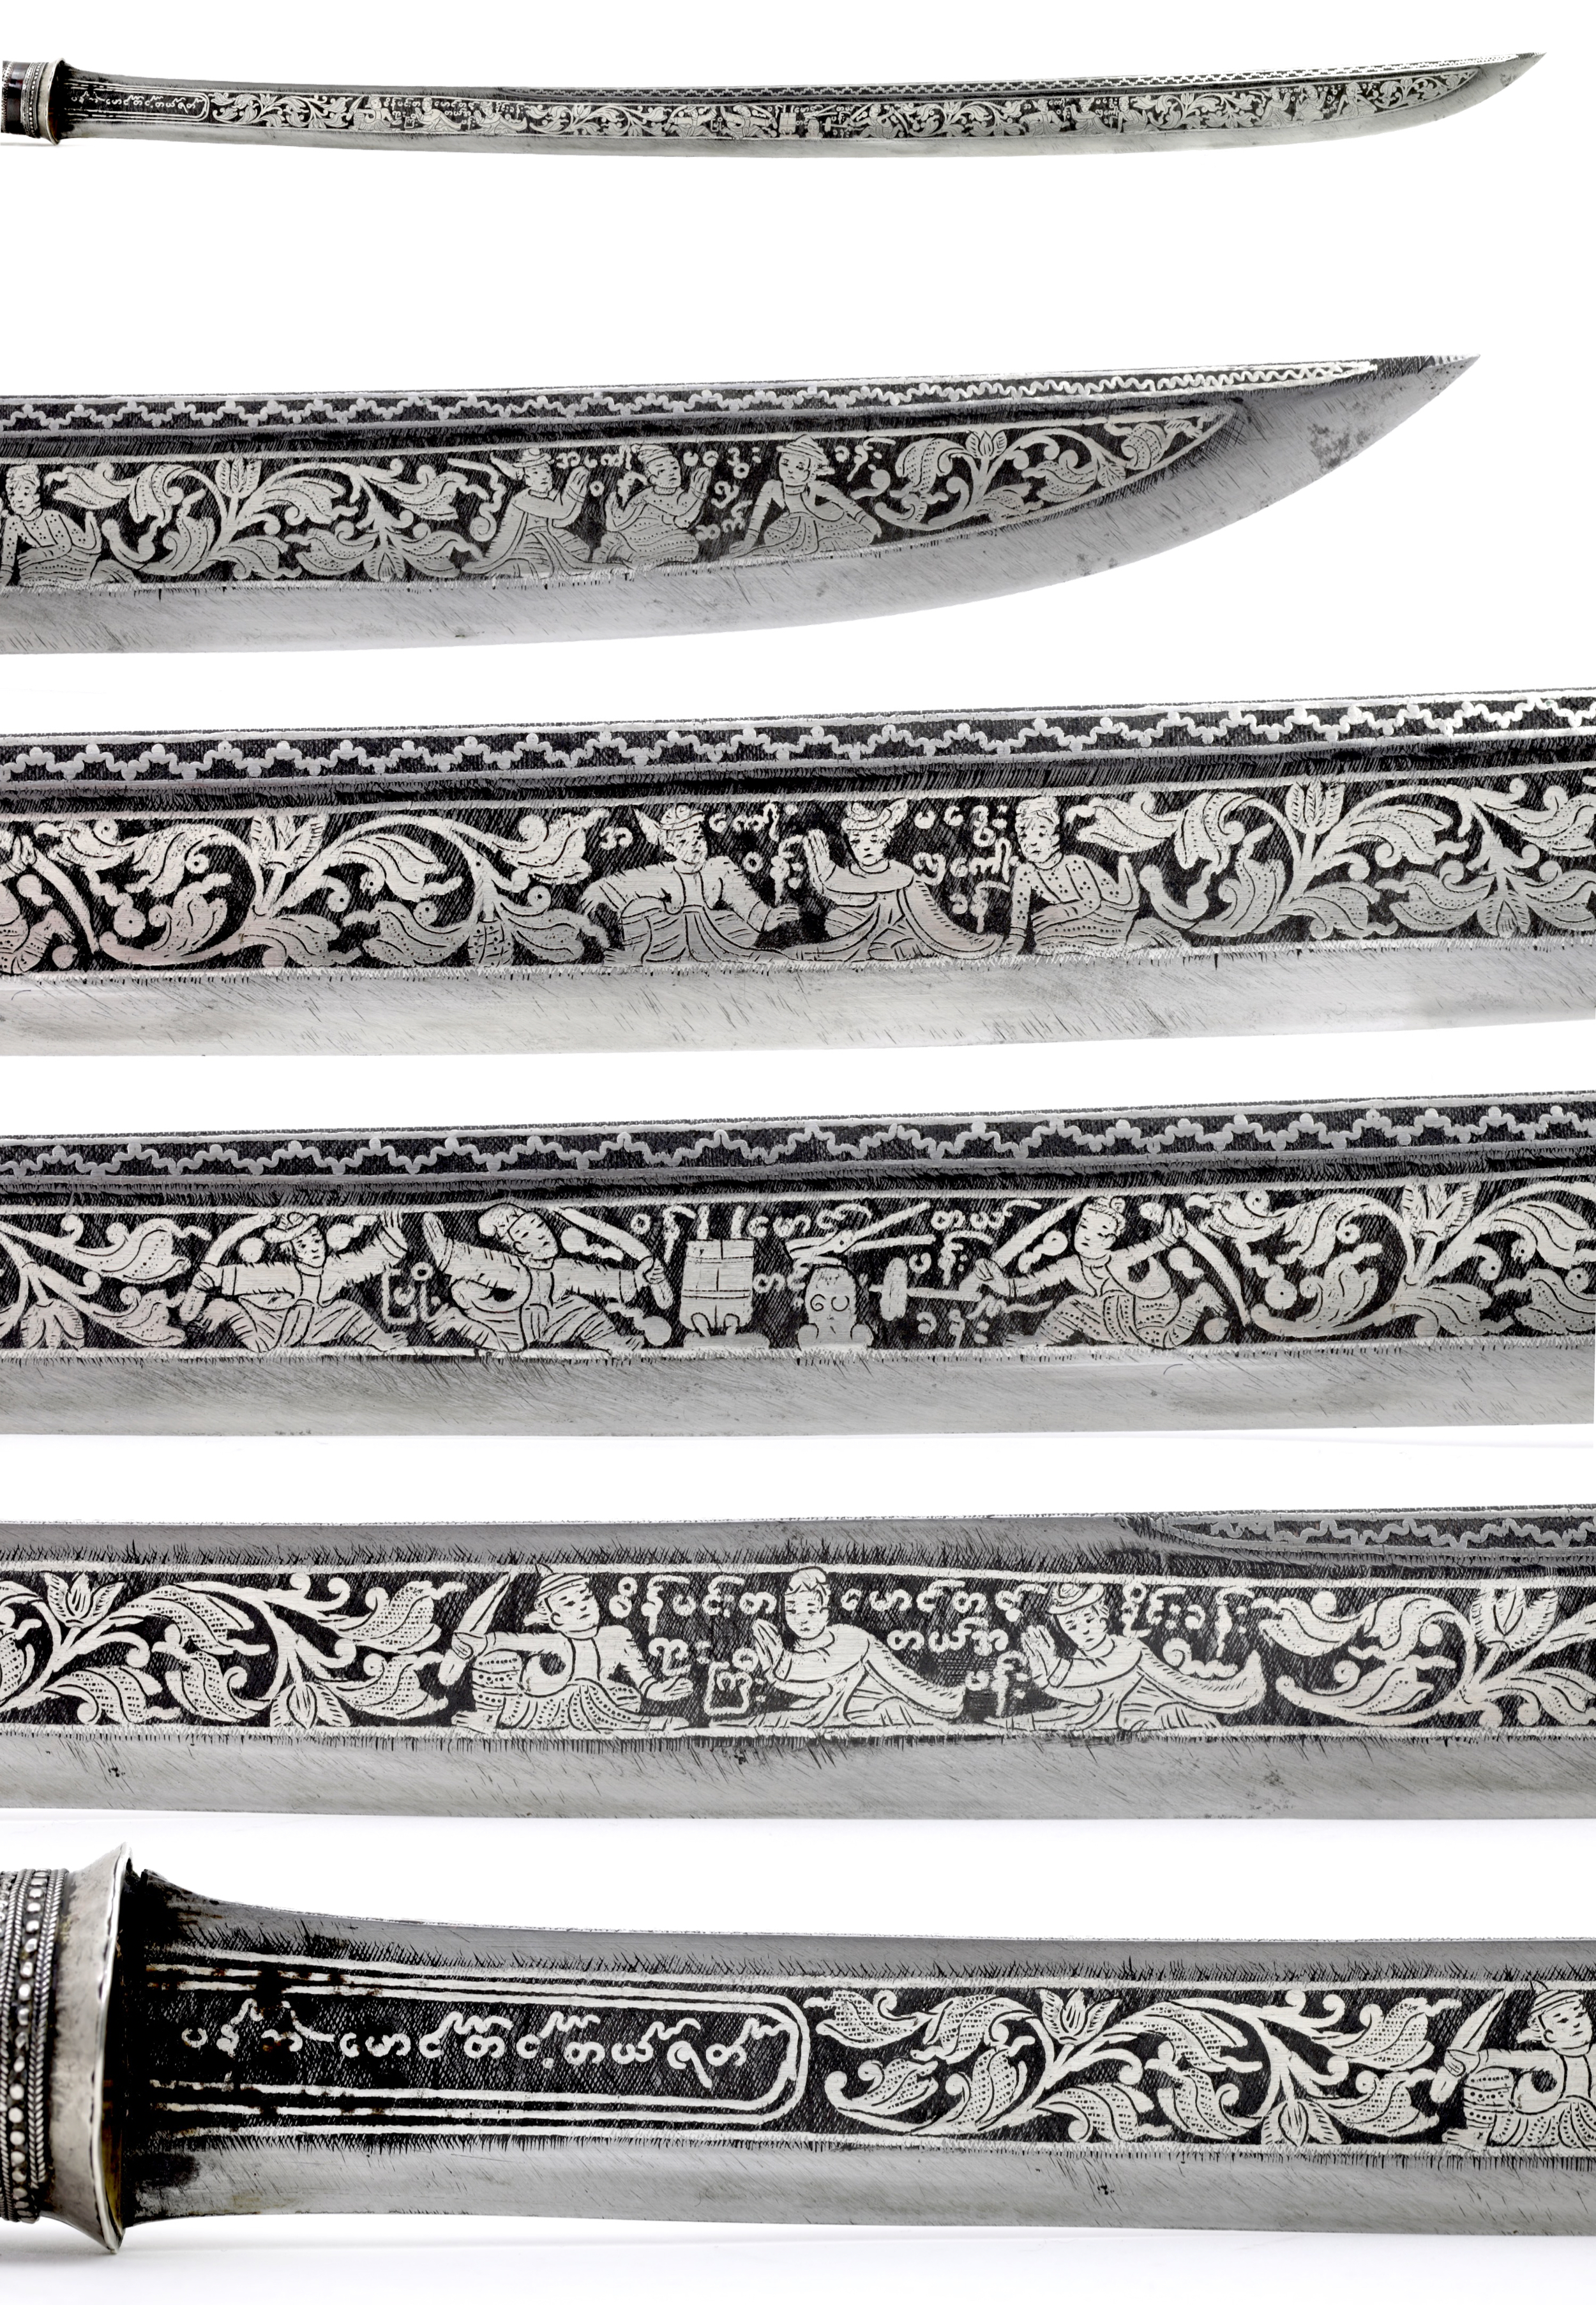 Mindan dha with silver overlaid blade with a story with a forging scene